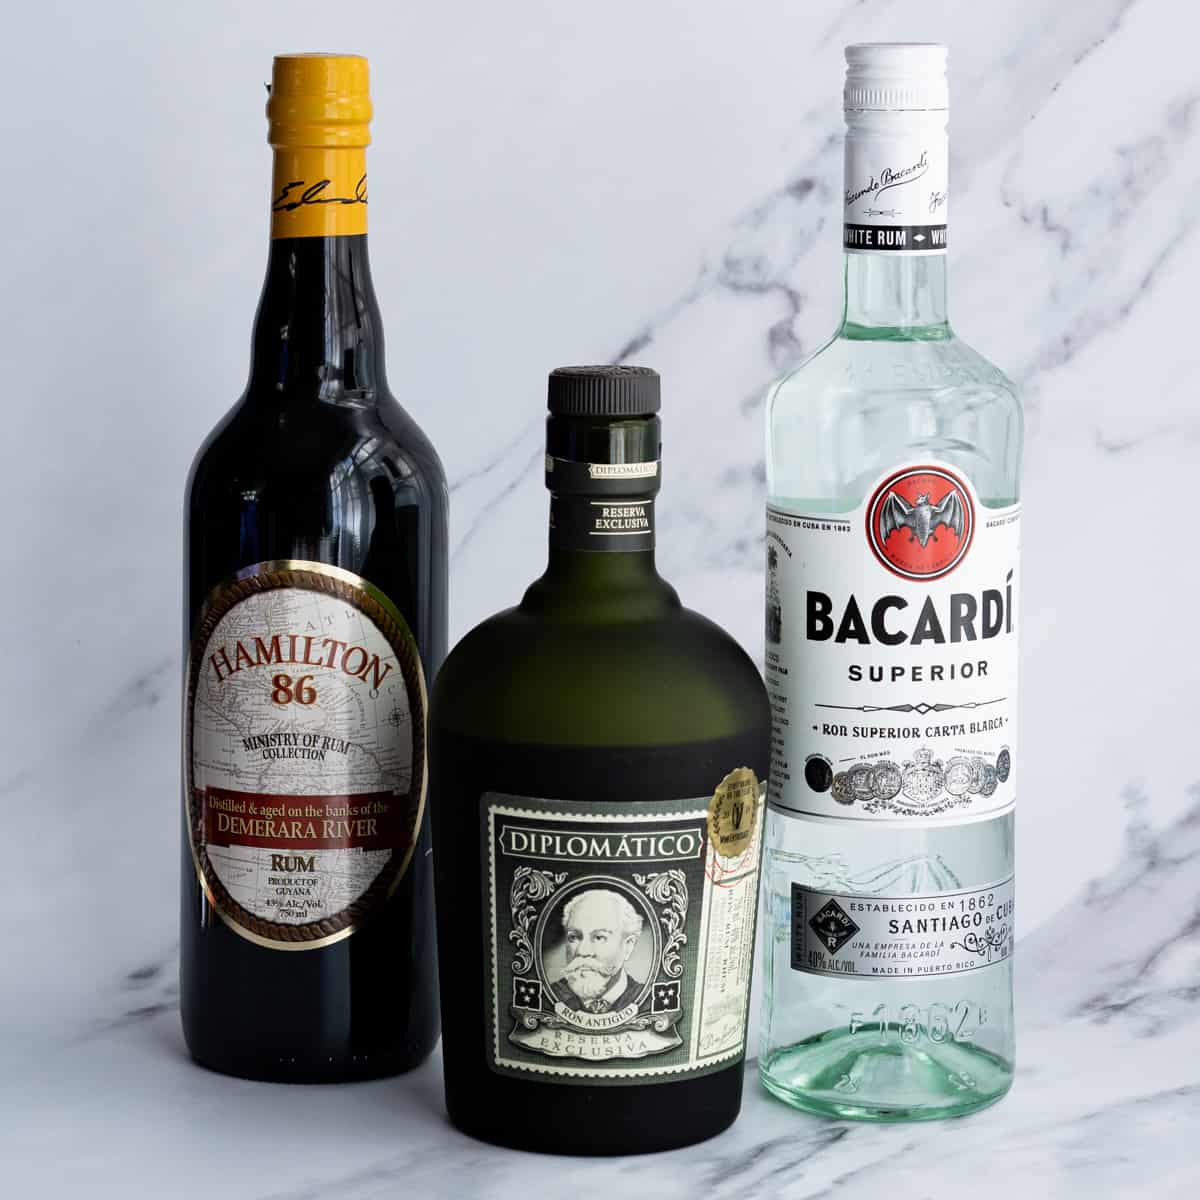 A selection of rums, including light, dark, and aged rum, sit on a marble countertop.